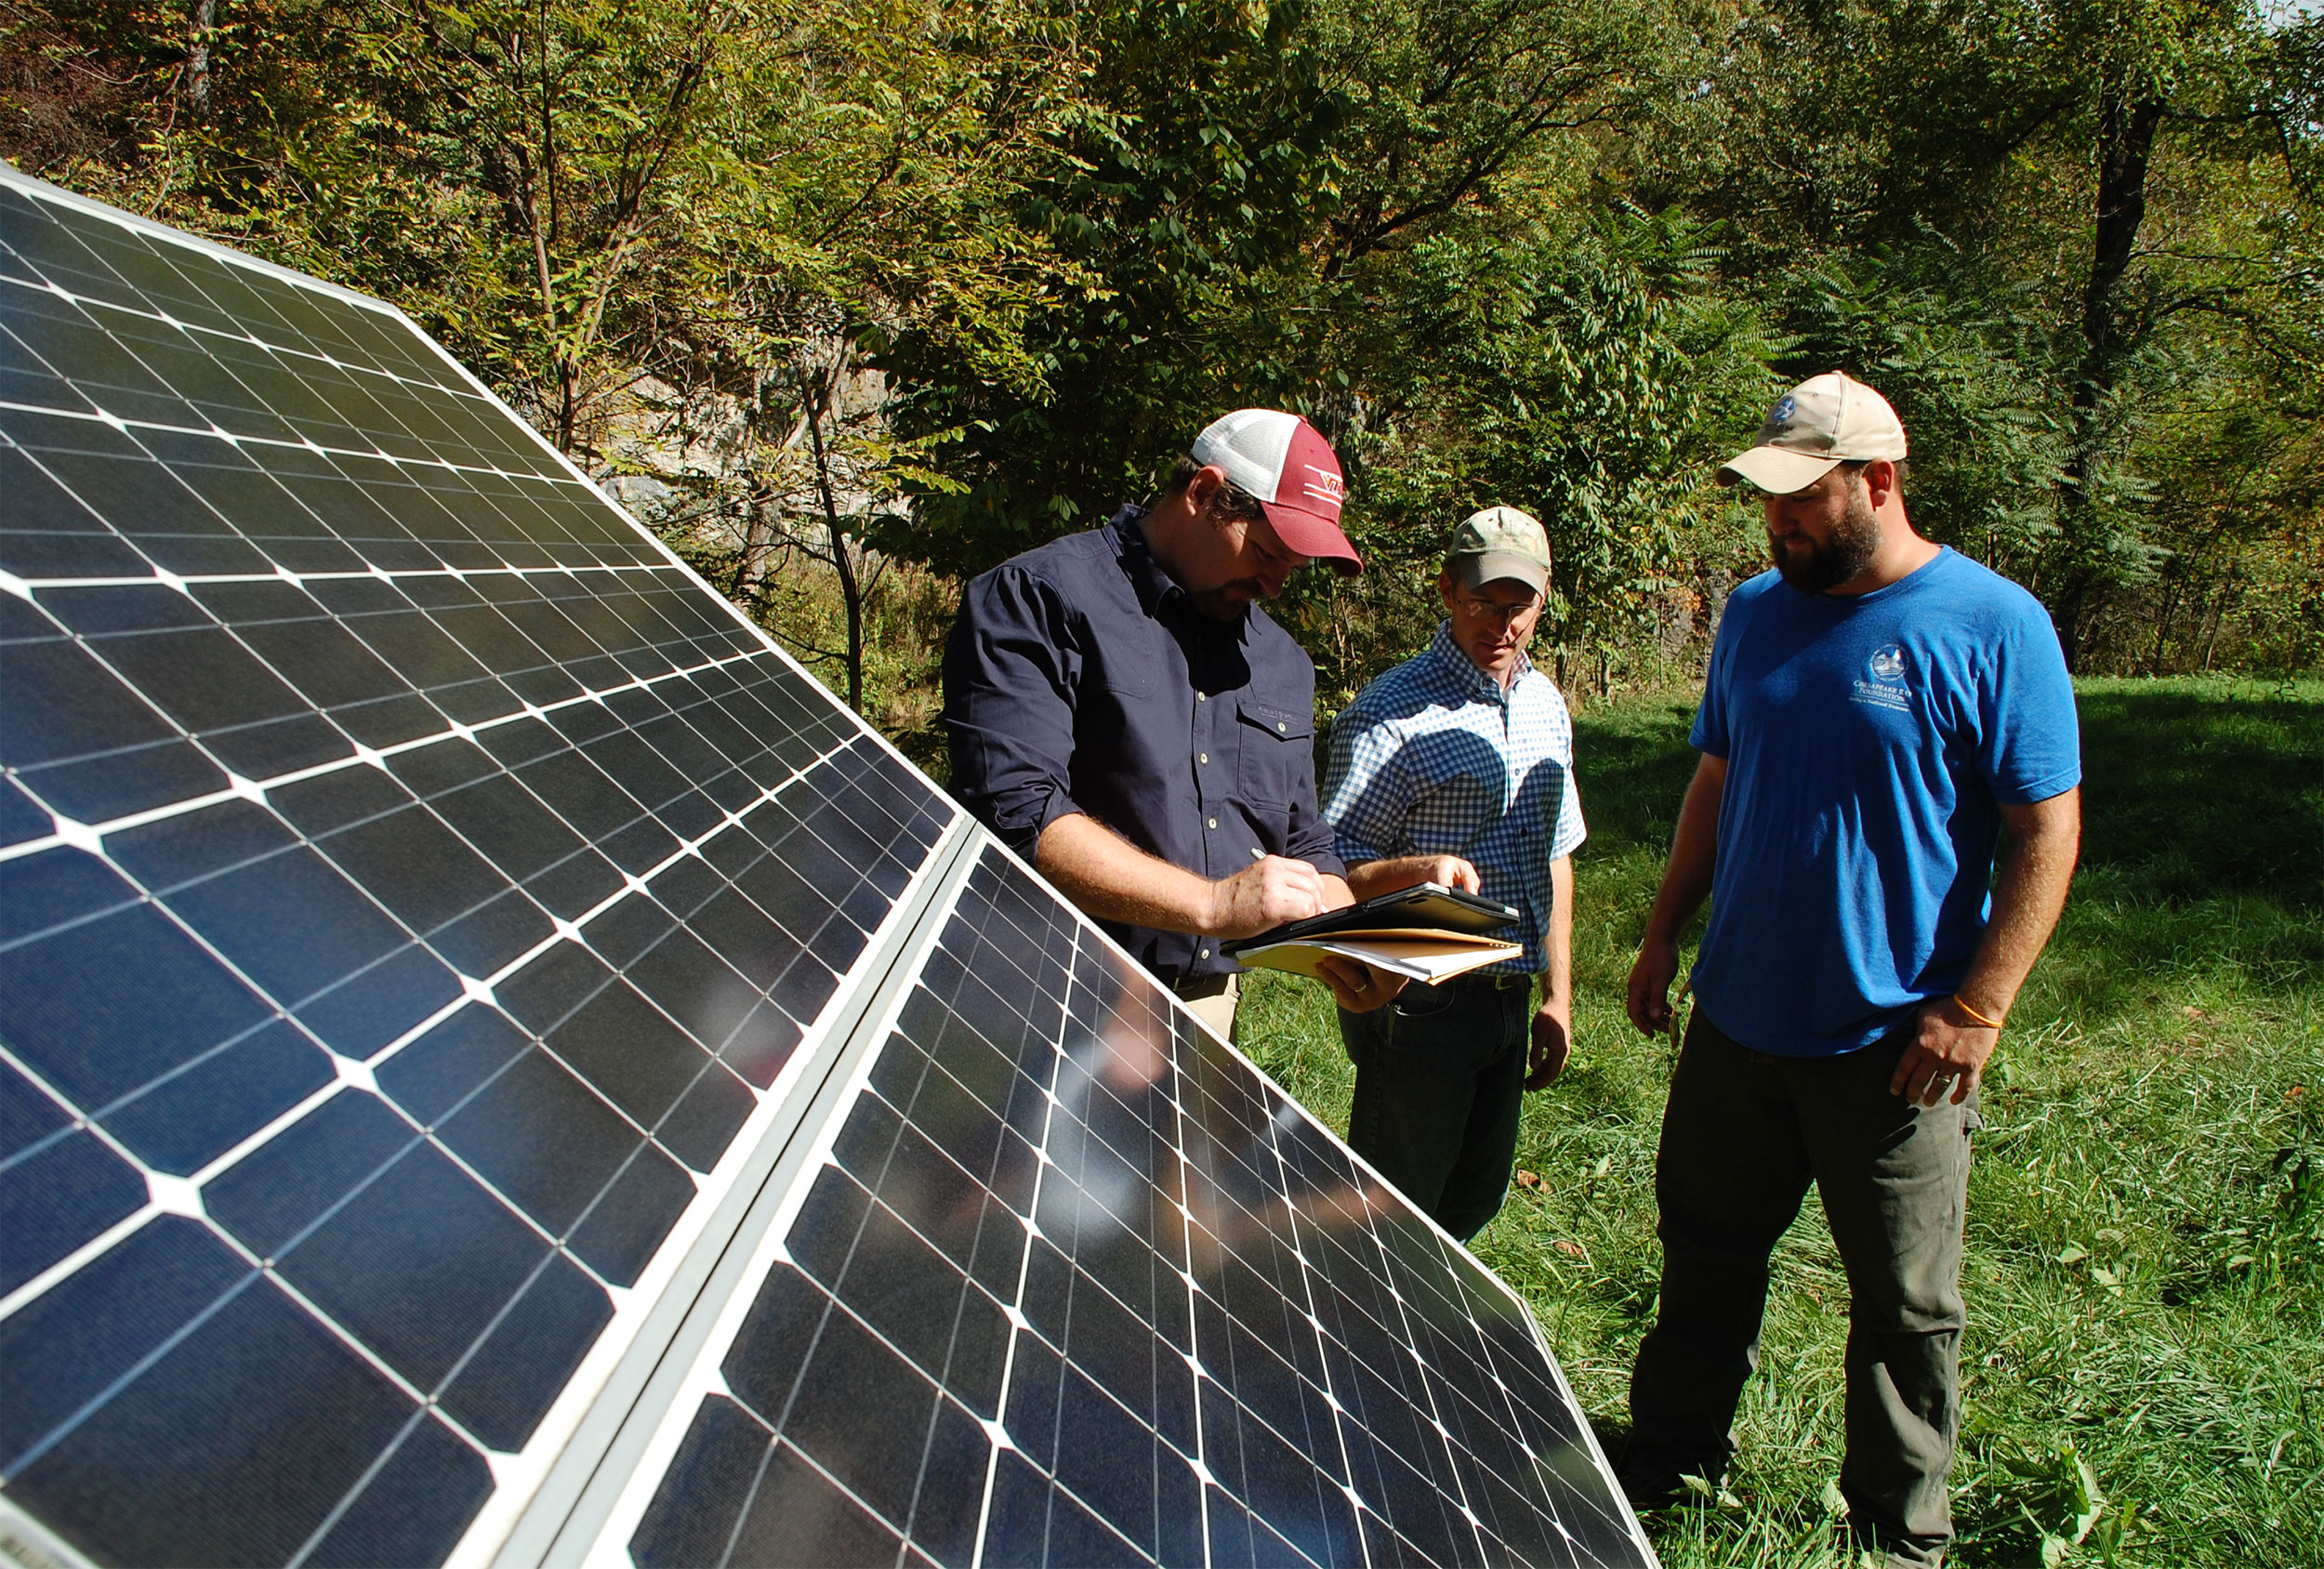 Extension Specialist John Ignosh and Extension Agent Matt Booher work with Alston Horn of the Chesapeake Bay Foundation to install solar-powered water stations that help protect the watershed. Photo by Kenny Fletcher, Chesapeake Bay Foundation.